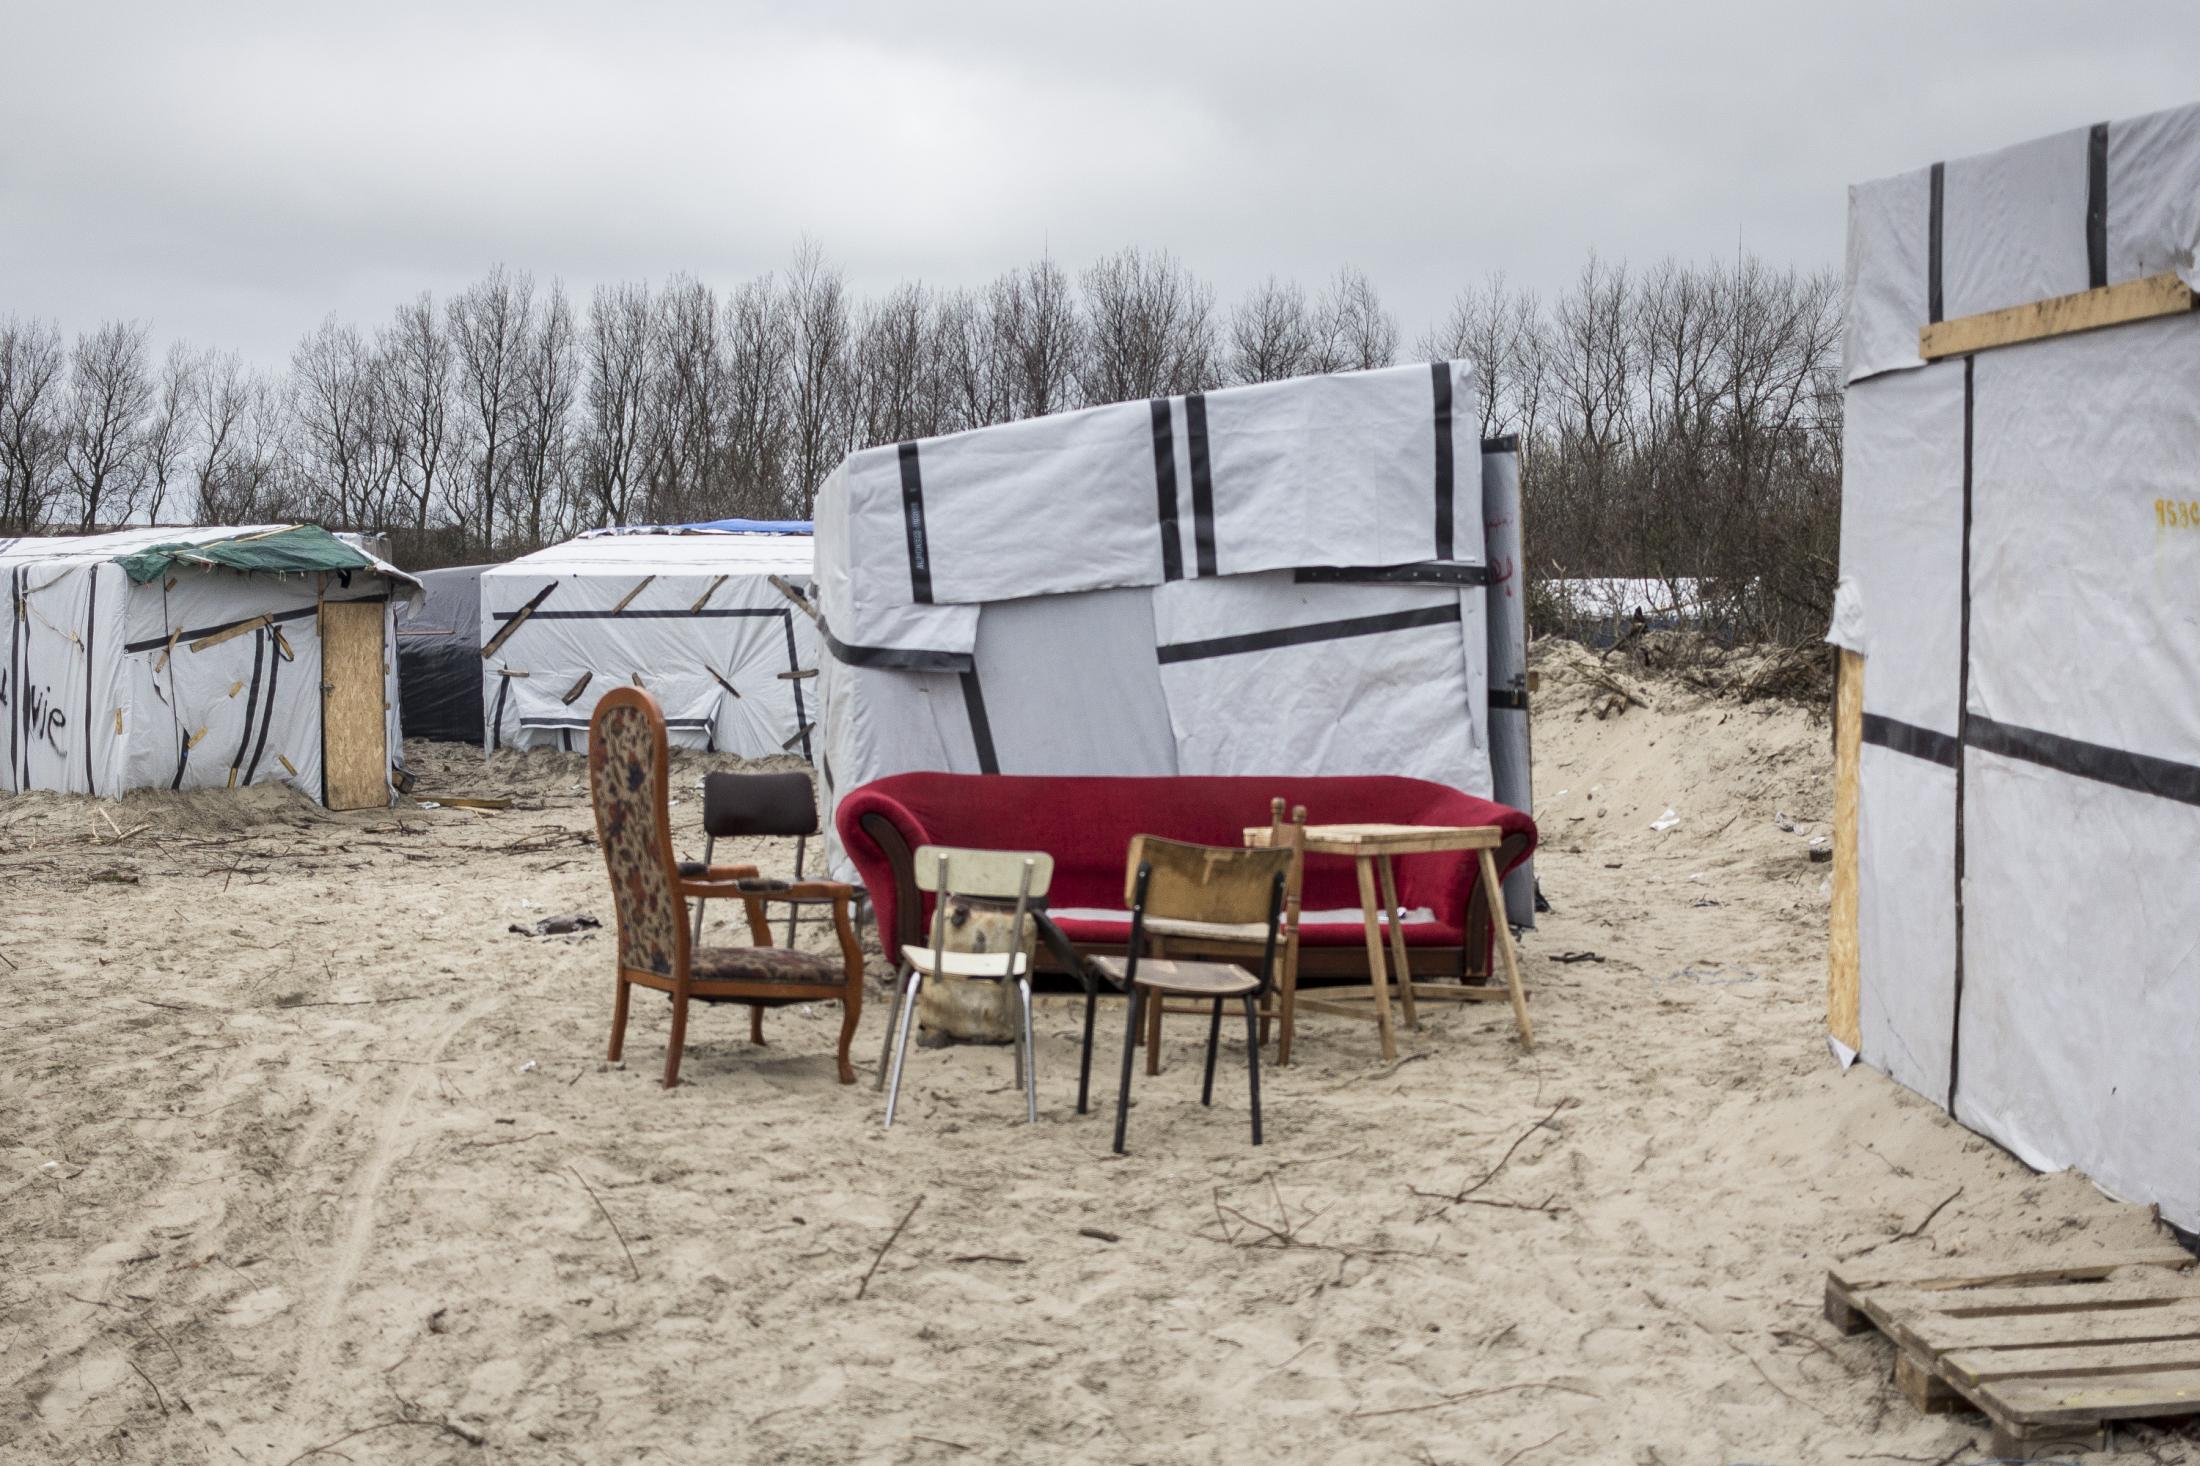 Latent urbanities - An outside living room in a soudanese community in New Jungle , the refugees camp in Calais. New...